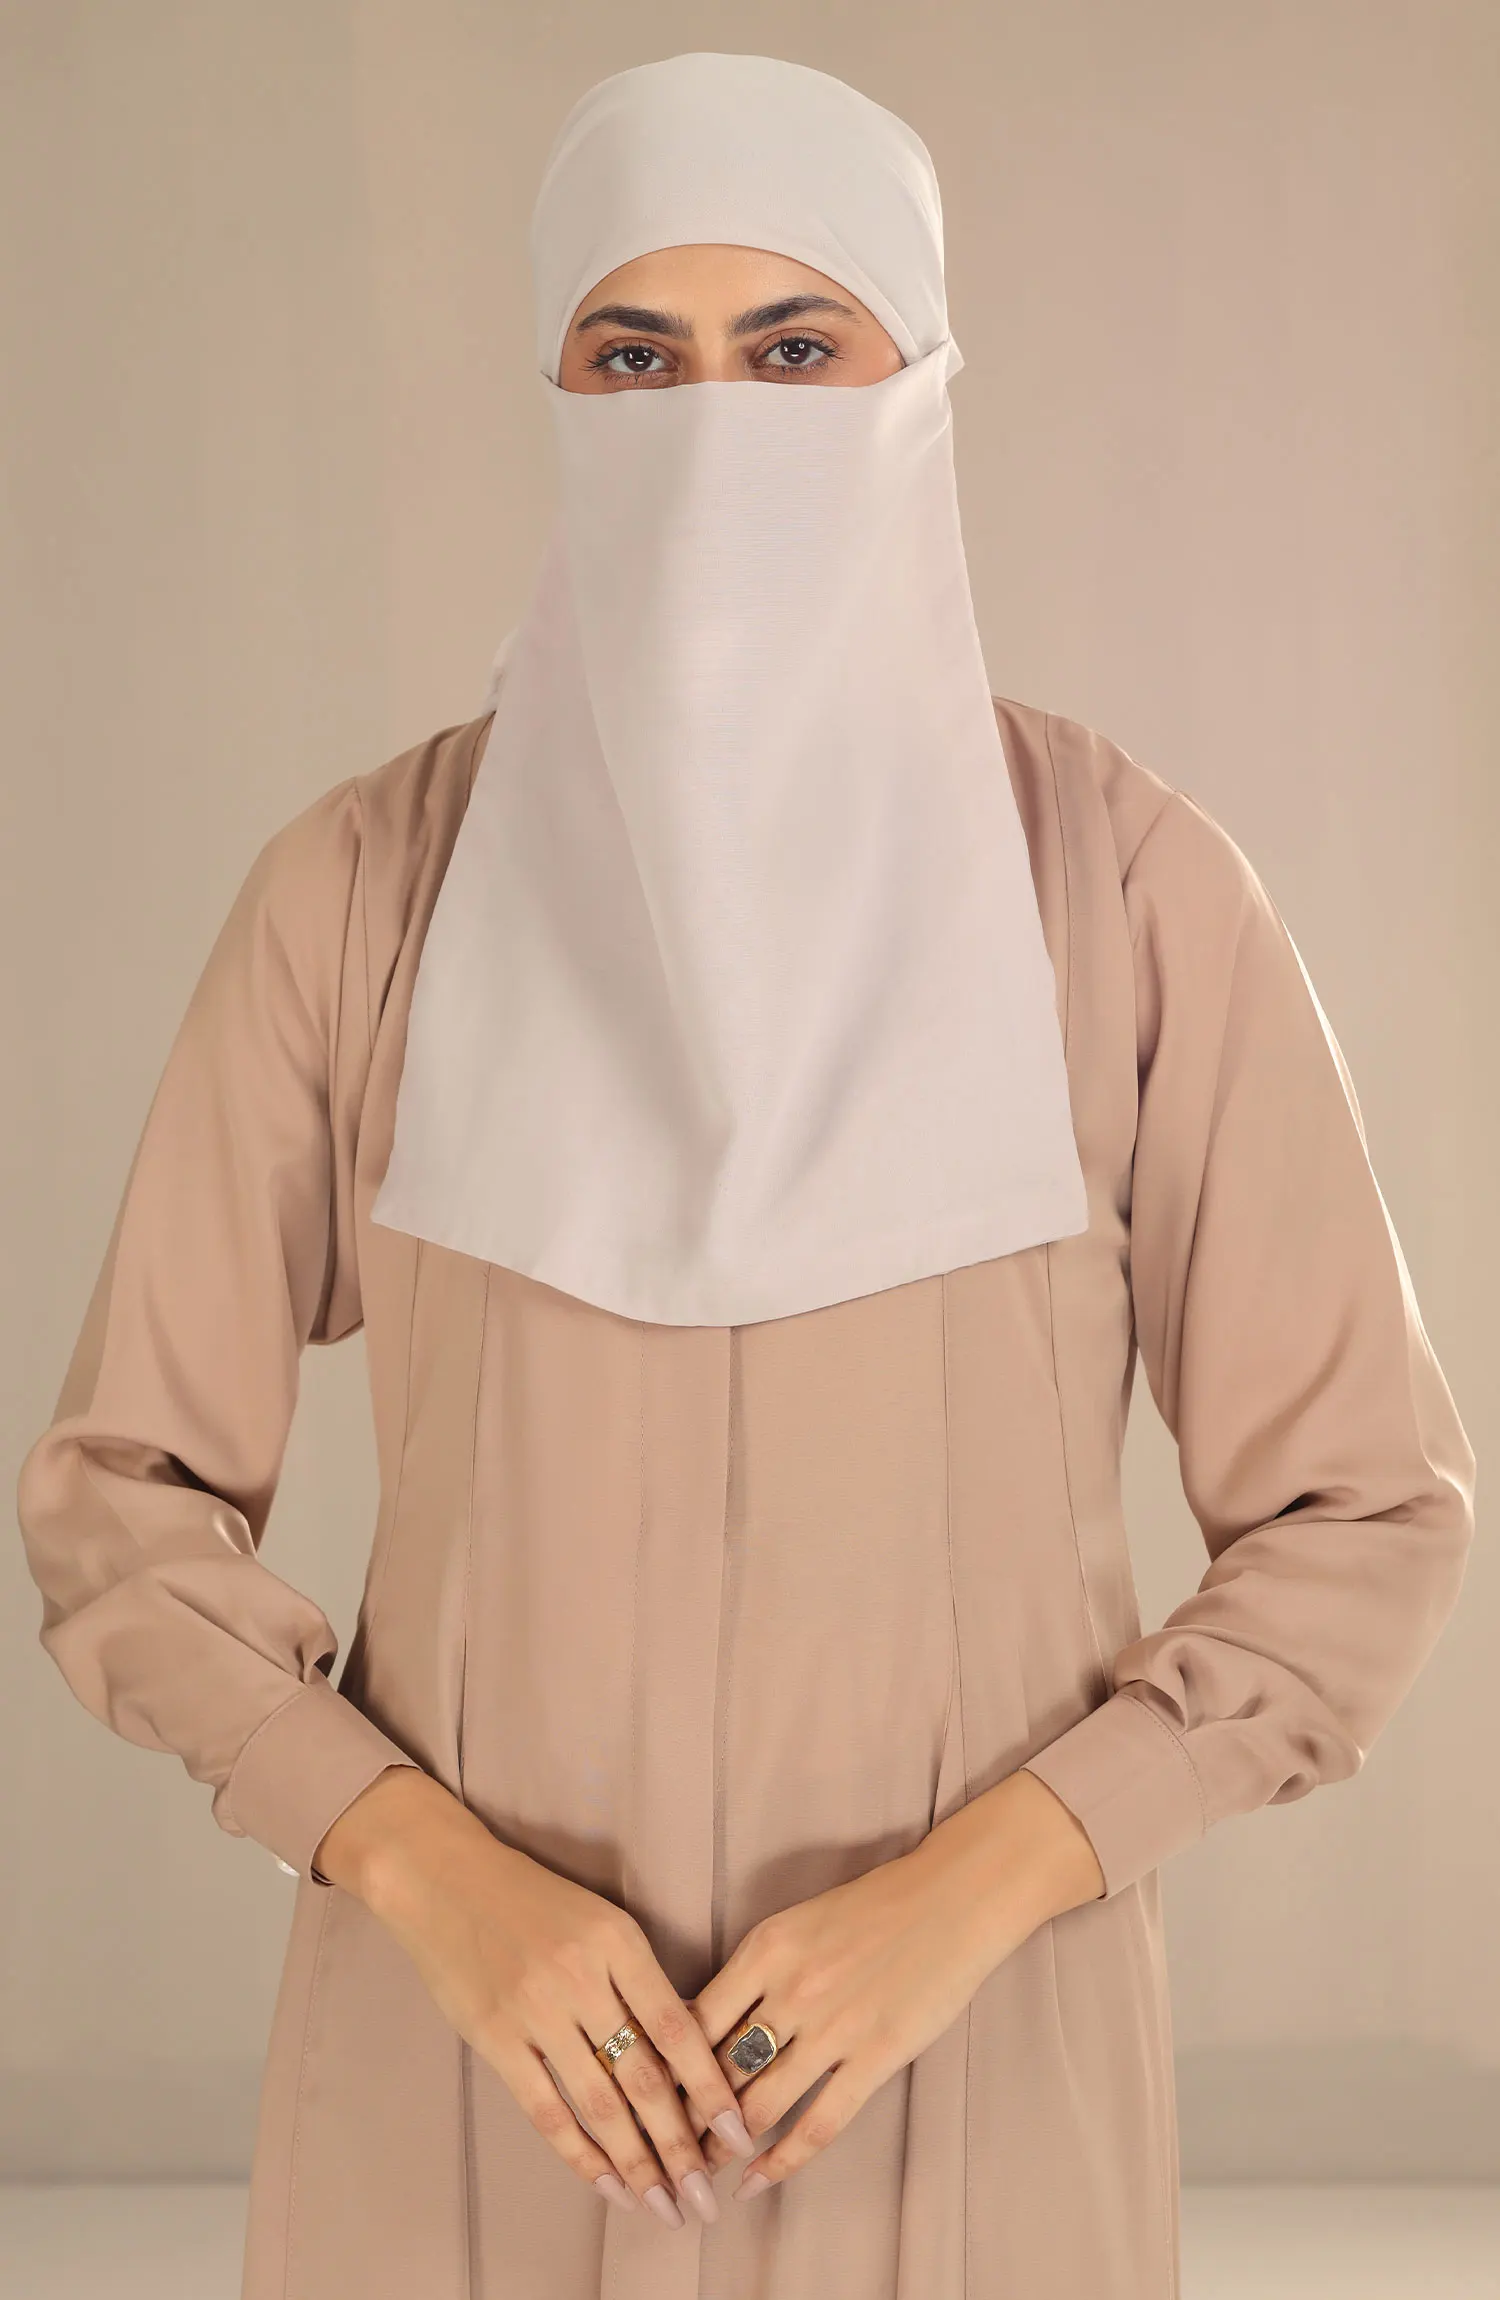 Black Camels Half Niqab With Ties Collection - HNWT-10